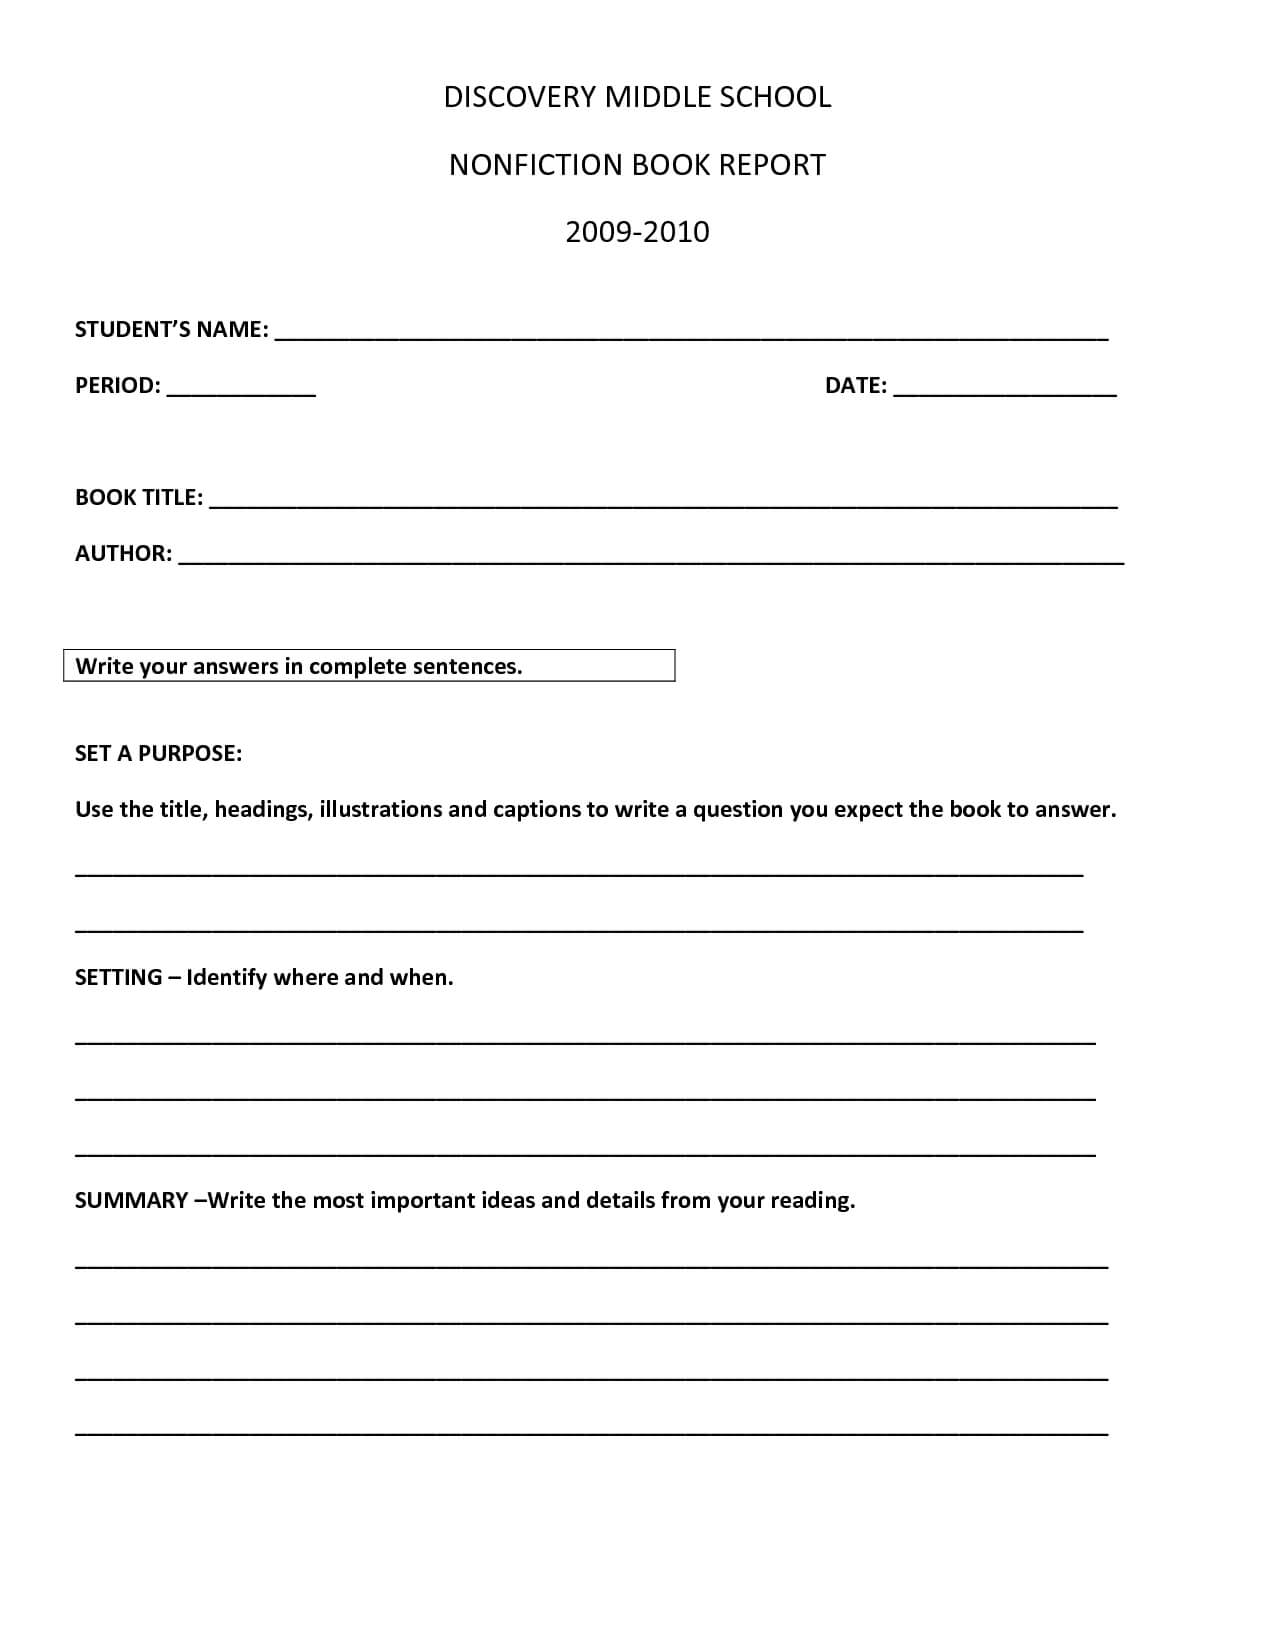 Book Report Template | Discovery Middle School Nonfiction In Book Report Template High School